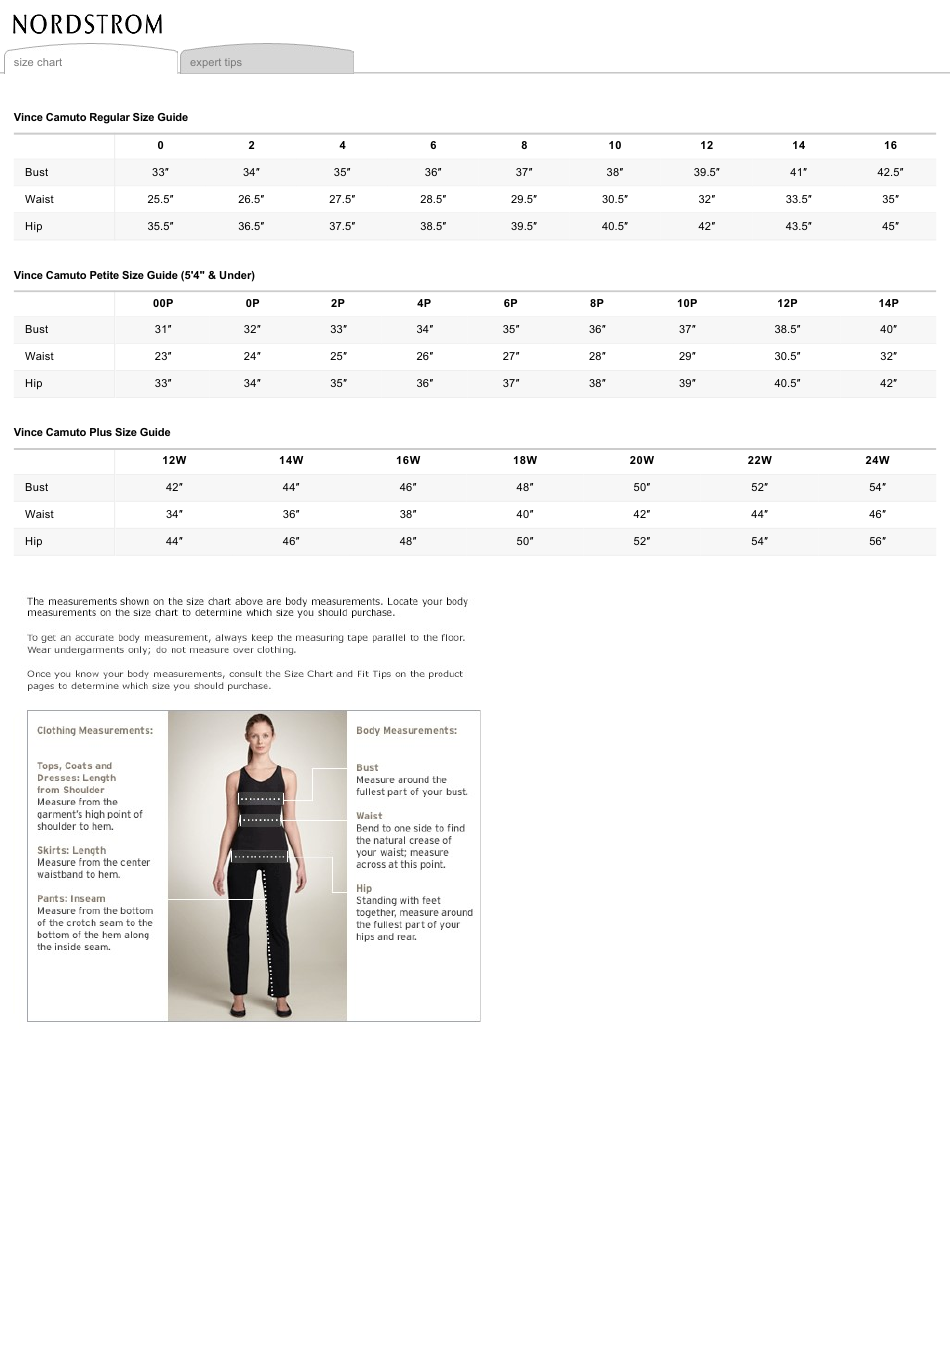 Size Chart - Vince Camuto, Page 1